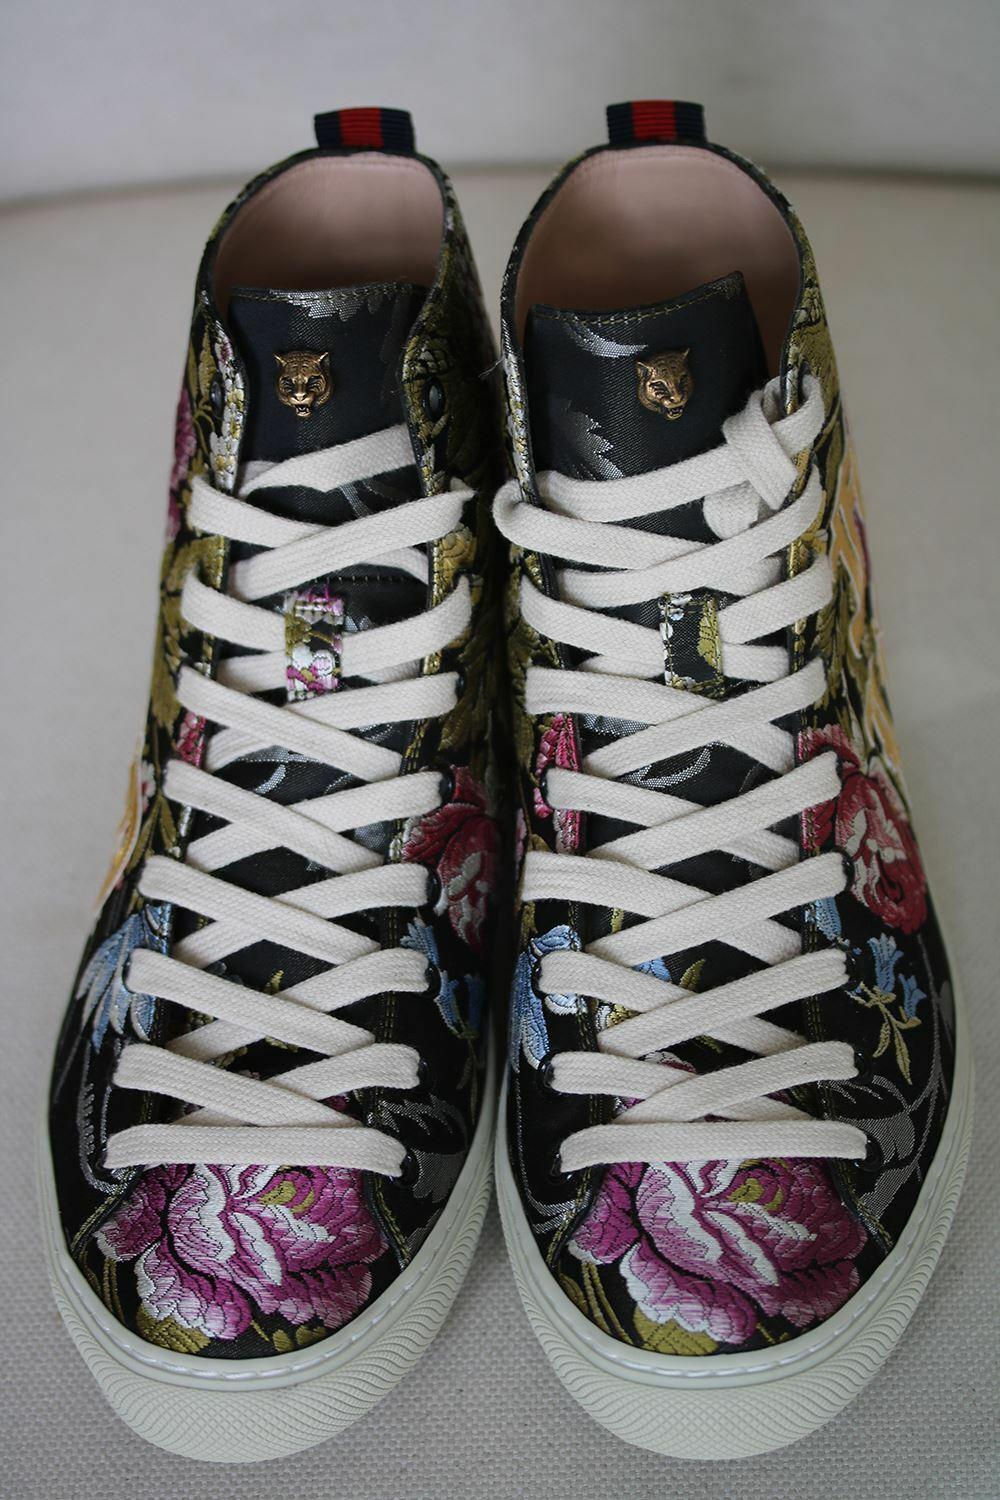 Floral jacquard round toe lace up high-top sneaker. Metallic leather 